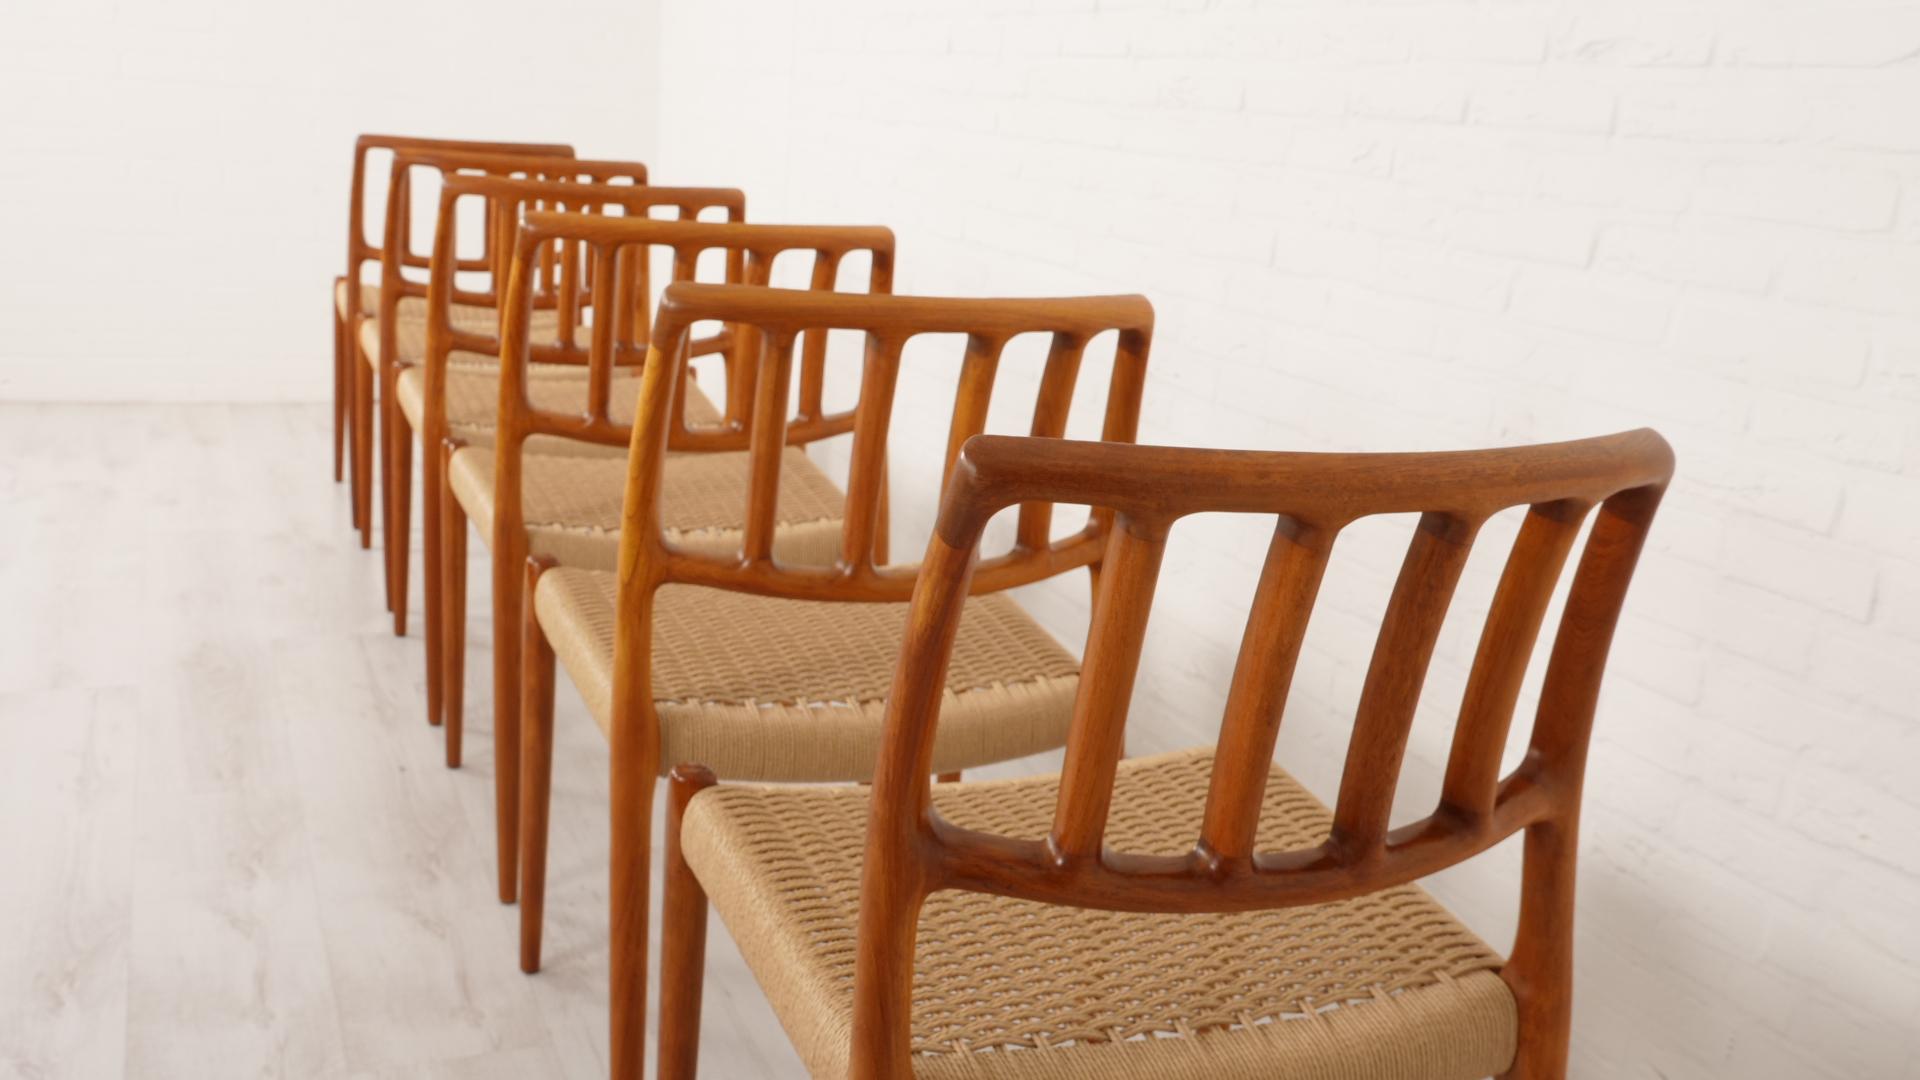 6 x Niels Otto Møller dining chairs  Model 83  Papercord  Teak  Restored For Sale 11